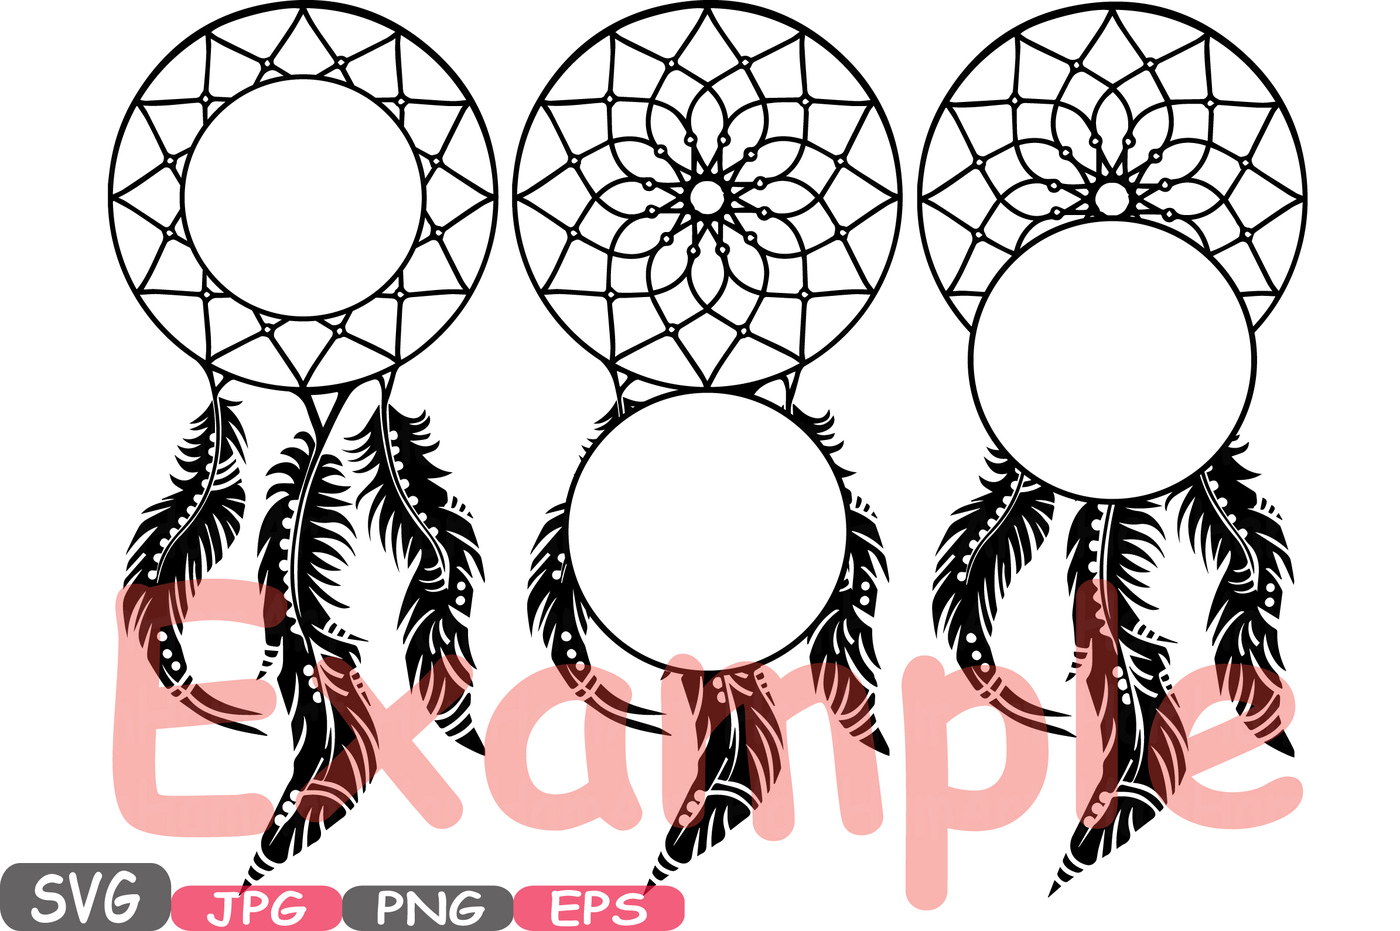 Download The best free Dream catcher silhouette images. Download ...